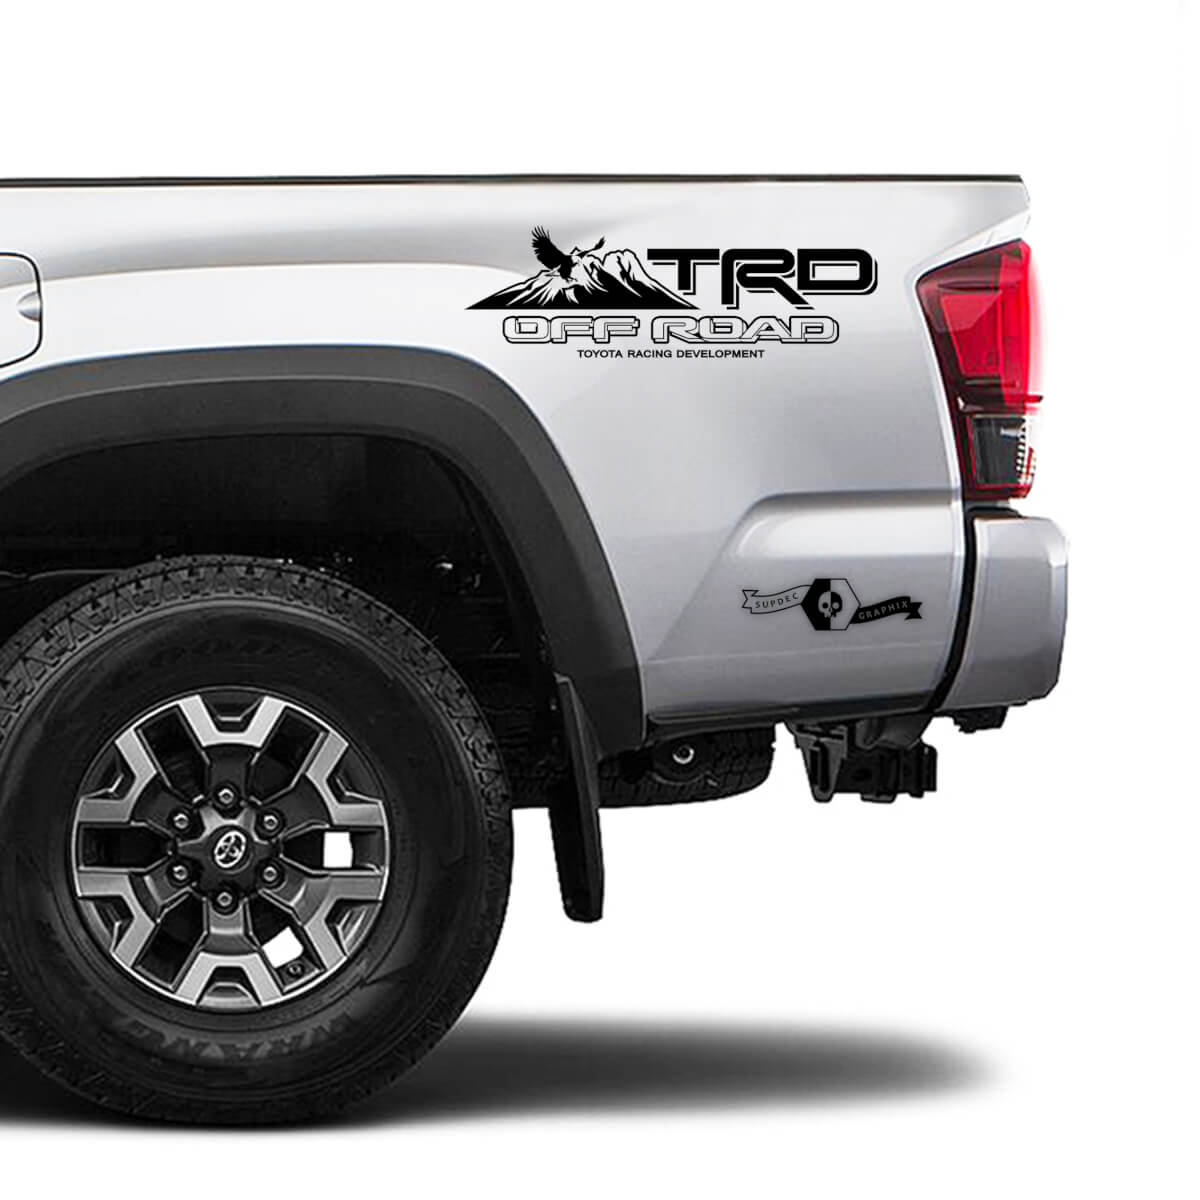 TRD Off Road TOYOTA Mountain Bald Eagle Decals Stickers for Tacoma Tundra 4Runner Hilux side